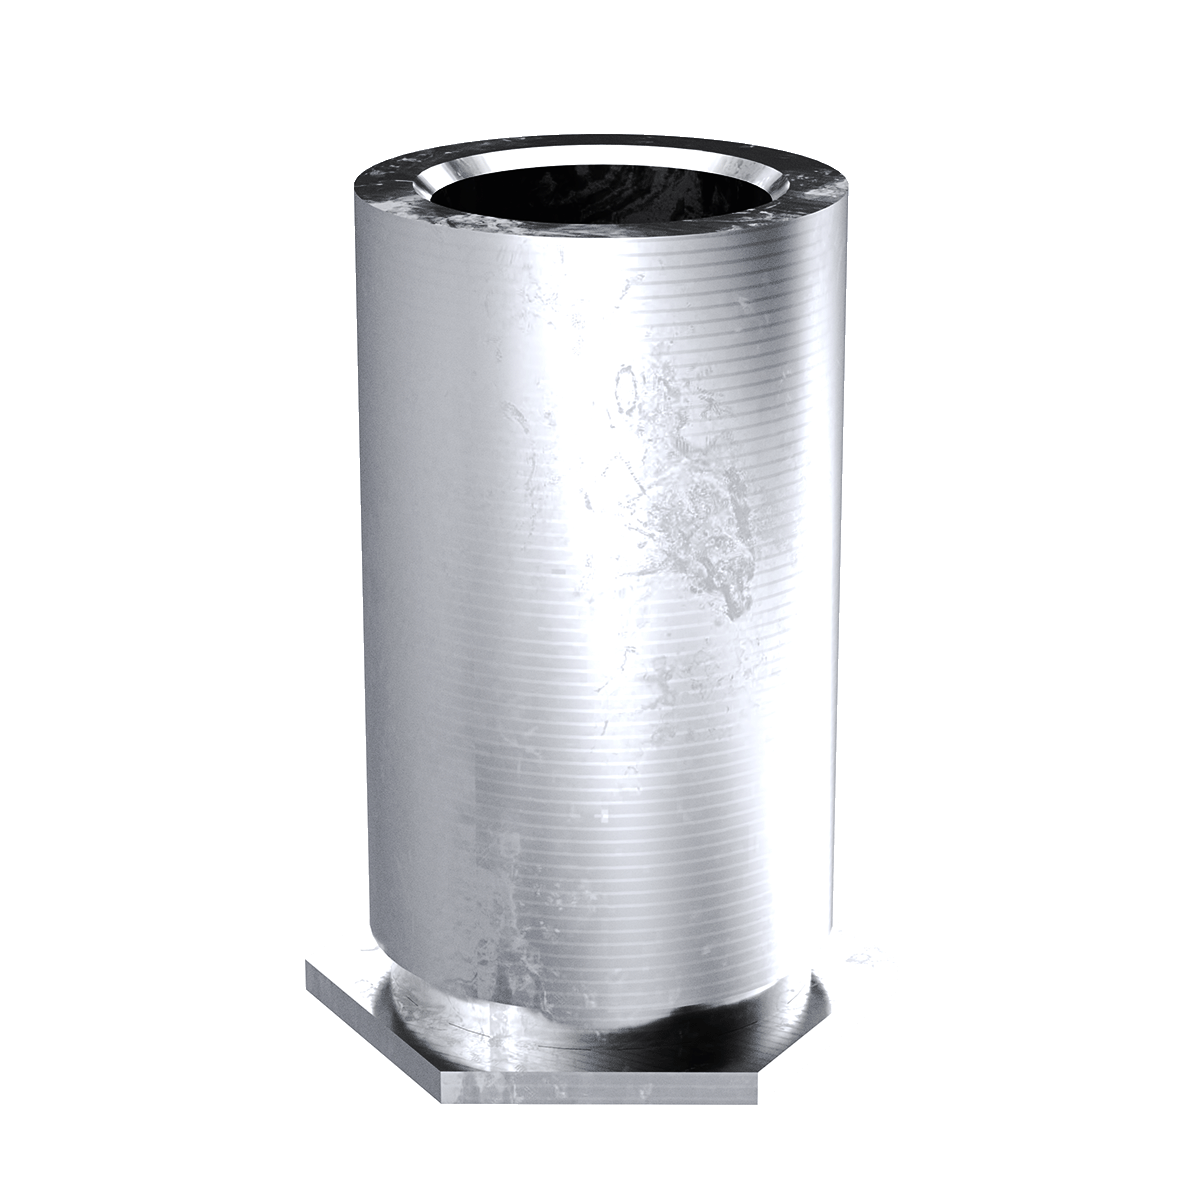 Self-Clinching Standoff, Through Unthreaded, 300 Series Stainless Steel, Passivated, 5.1 x 12, 100 Pack